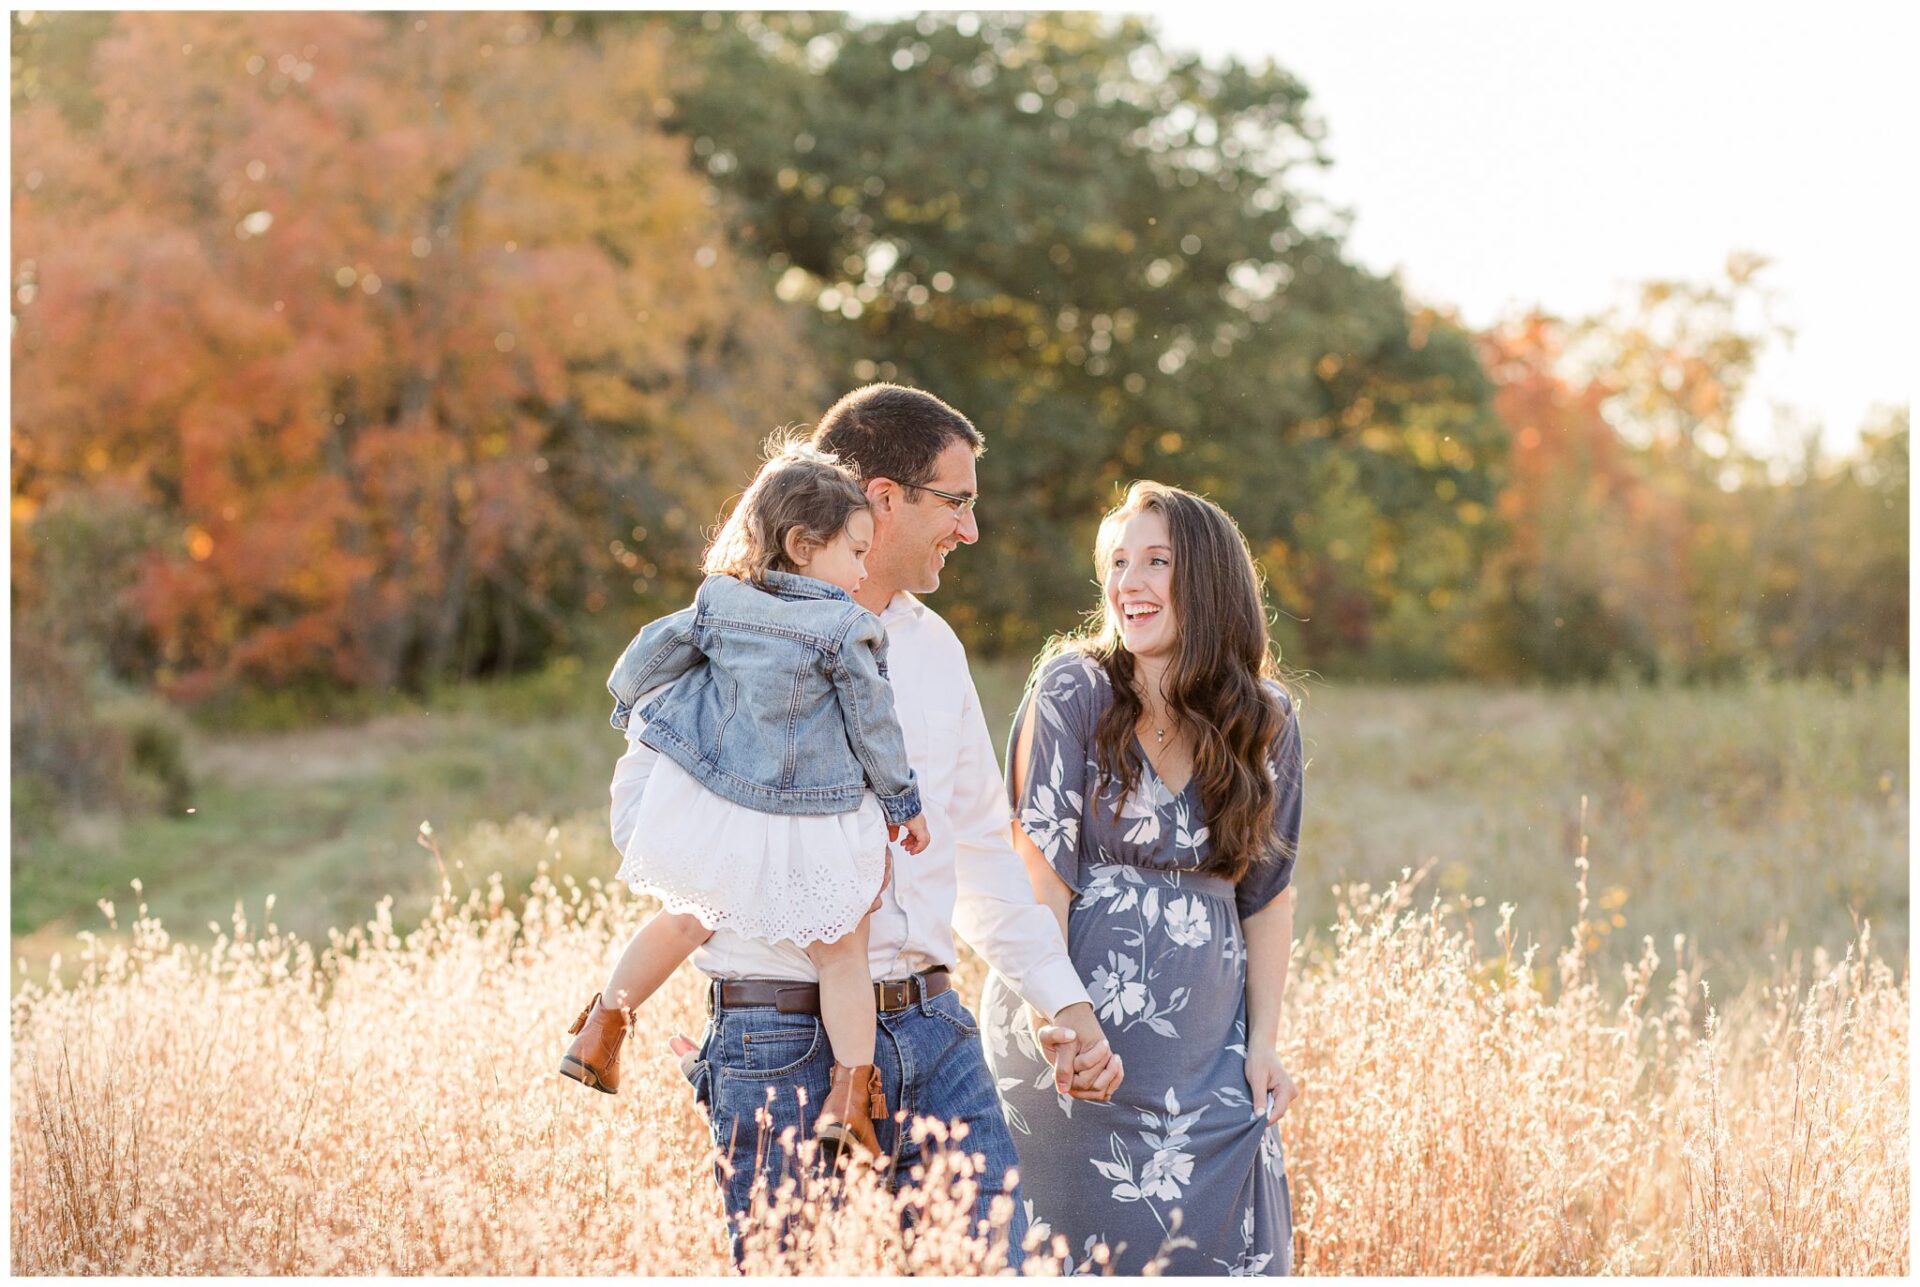 Family walks through field laughing together maternity family photo Wayland Massachusetts